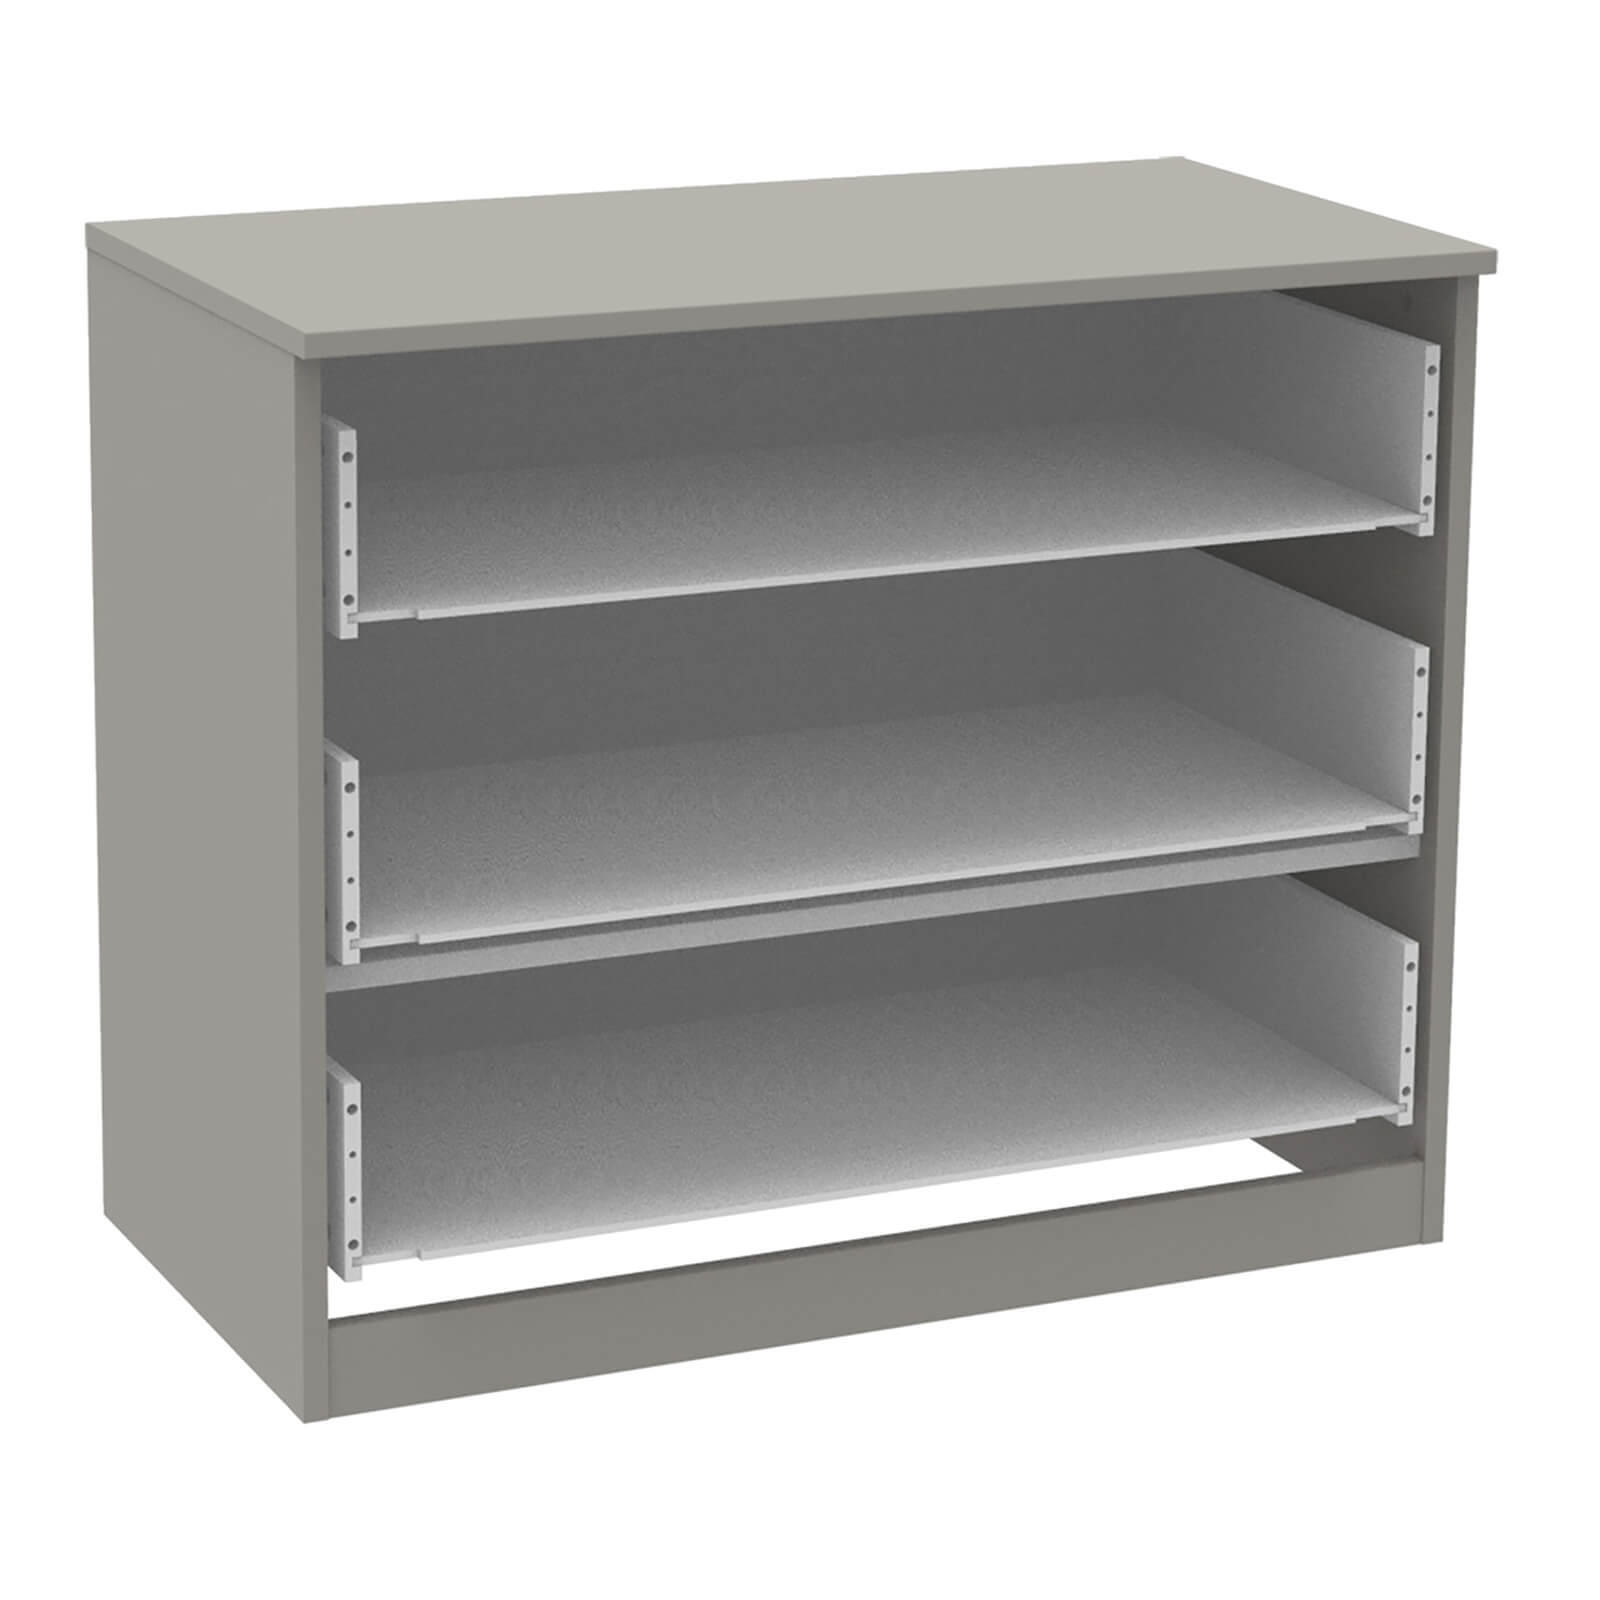 Fitted Bedroom 3 Drawer Wide Chest - Grey